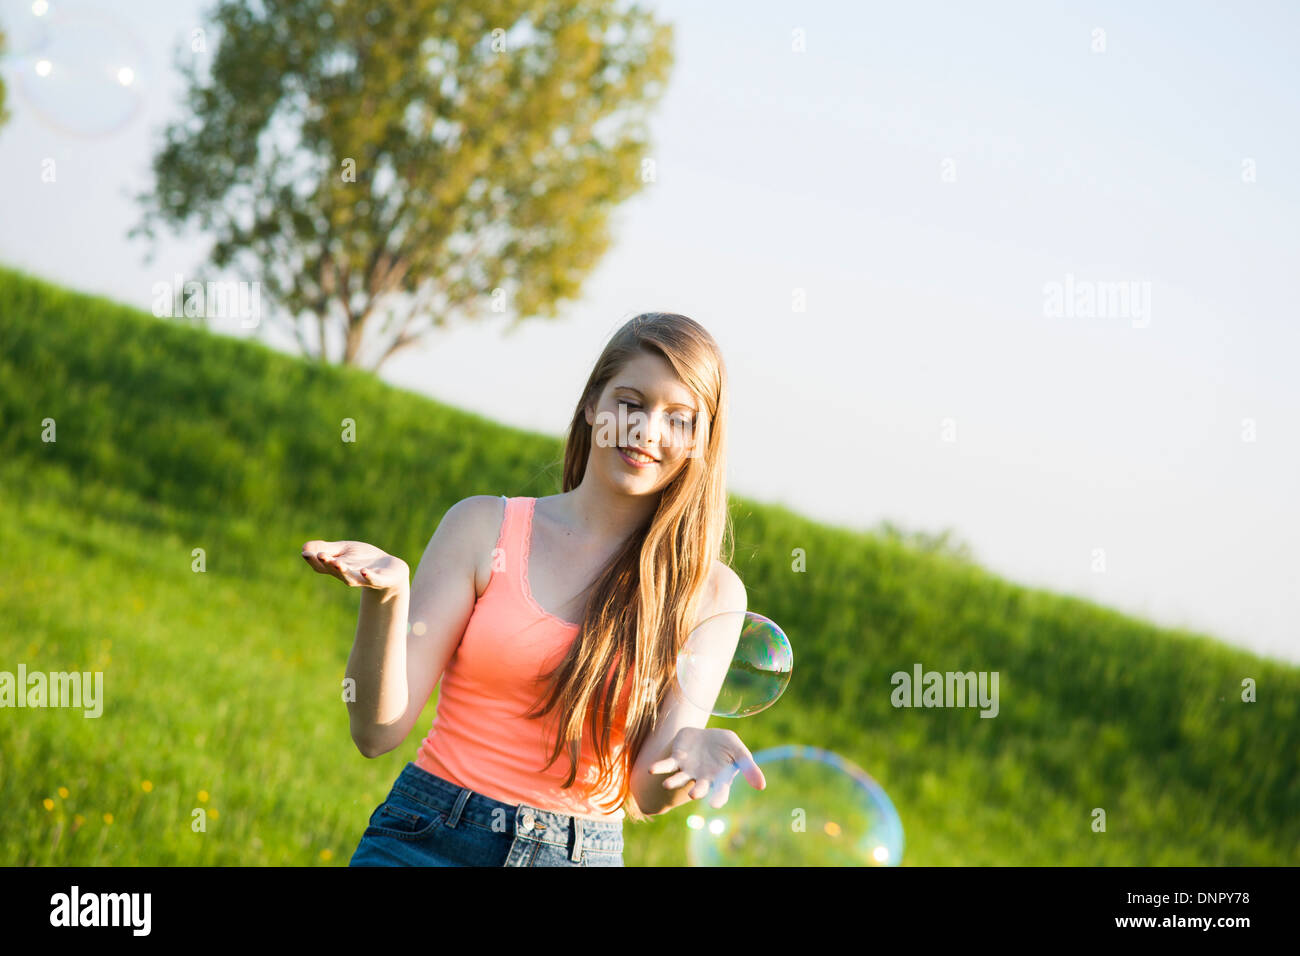 Young woman standing in field playing with bubbles, Germany Stock Photo